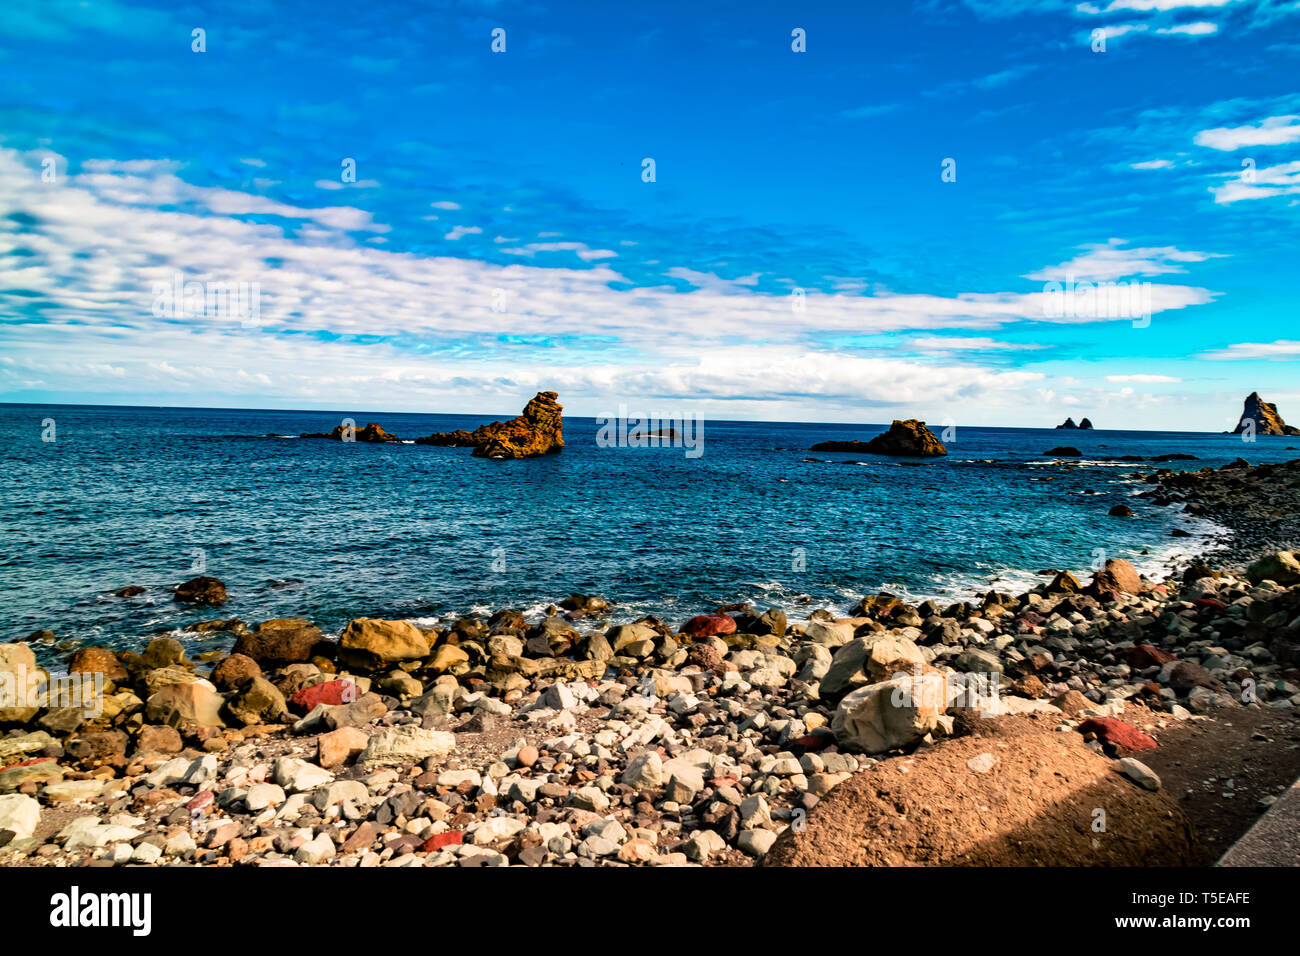 The beach of Almaciga, Tenerife north. This beach is just in the near of the famous Benijo beach, but it doesn't miss at beauty! Stock Photo